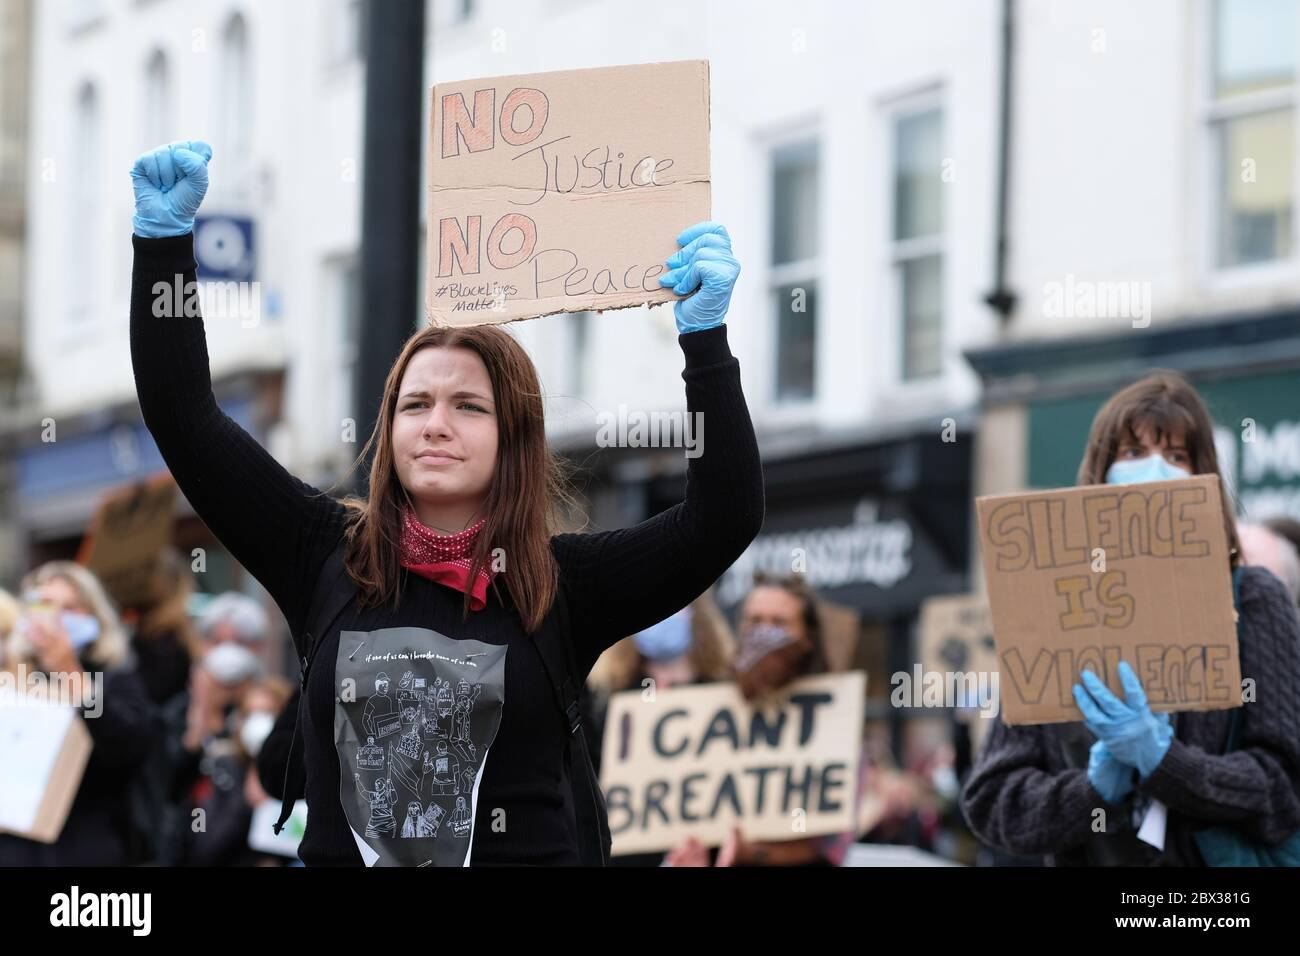 Hereford, Herefordshire, UK – Thursday 4th June 2020 – Protesters gather in Hereford as part of the Black Lives Matter ( BLM ) campaign in memory of George Floyd recently killed by Police officers in Minneapolis, Minnesota, USA.  The crowd size was estimated at approx 800 people. Photo Steven May / Alamy Live News Stock Photo